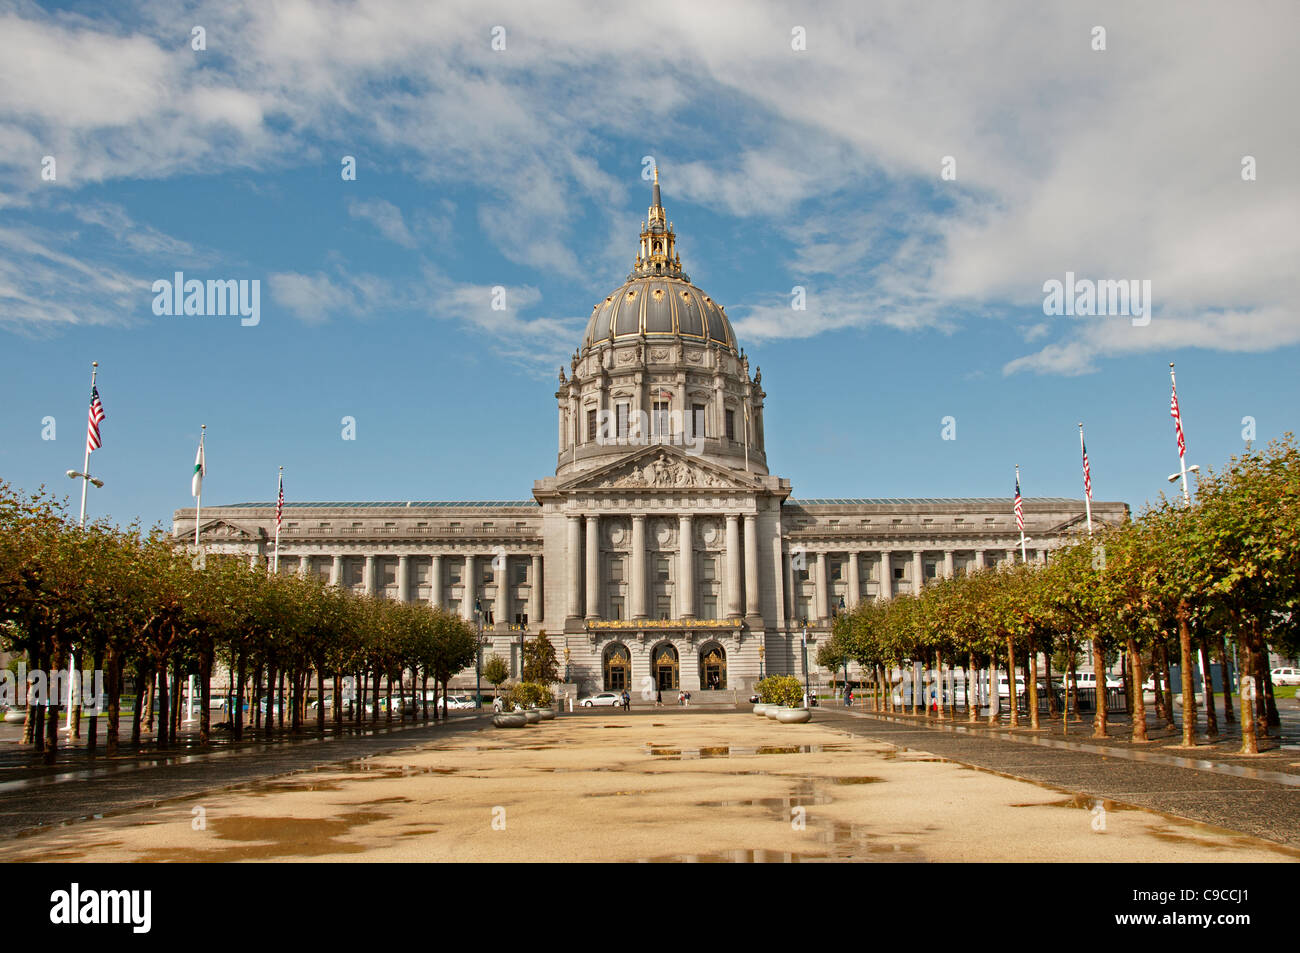 City Hall Civic Center San Francisco California USA American United States of America Banque D'Images